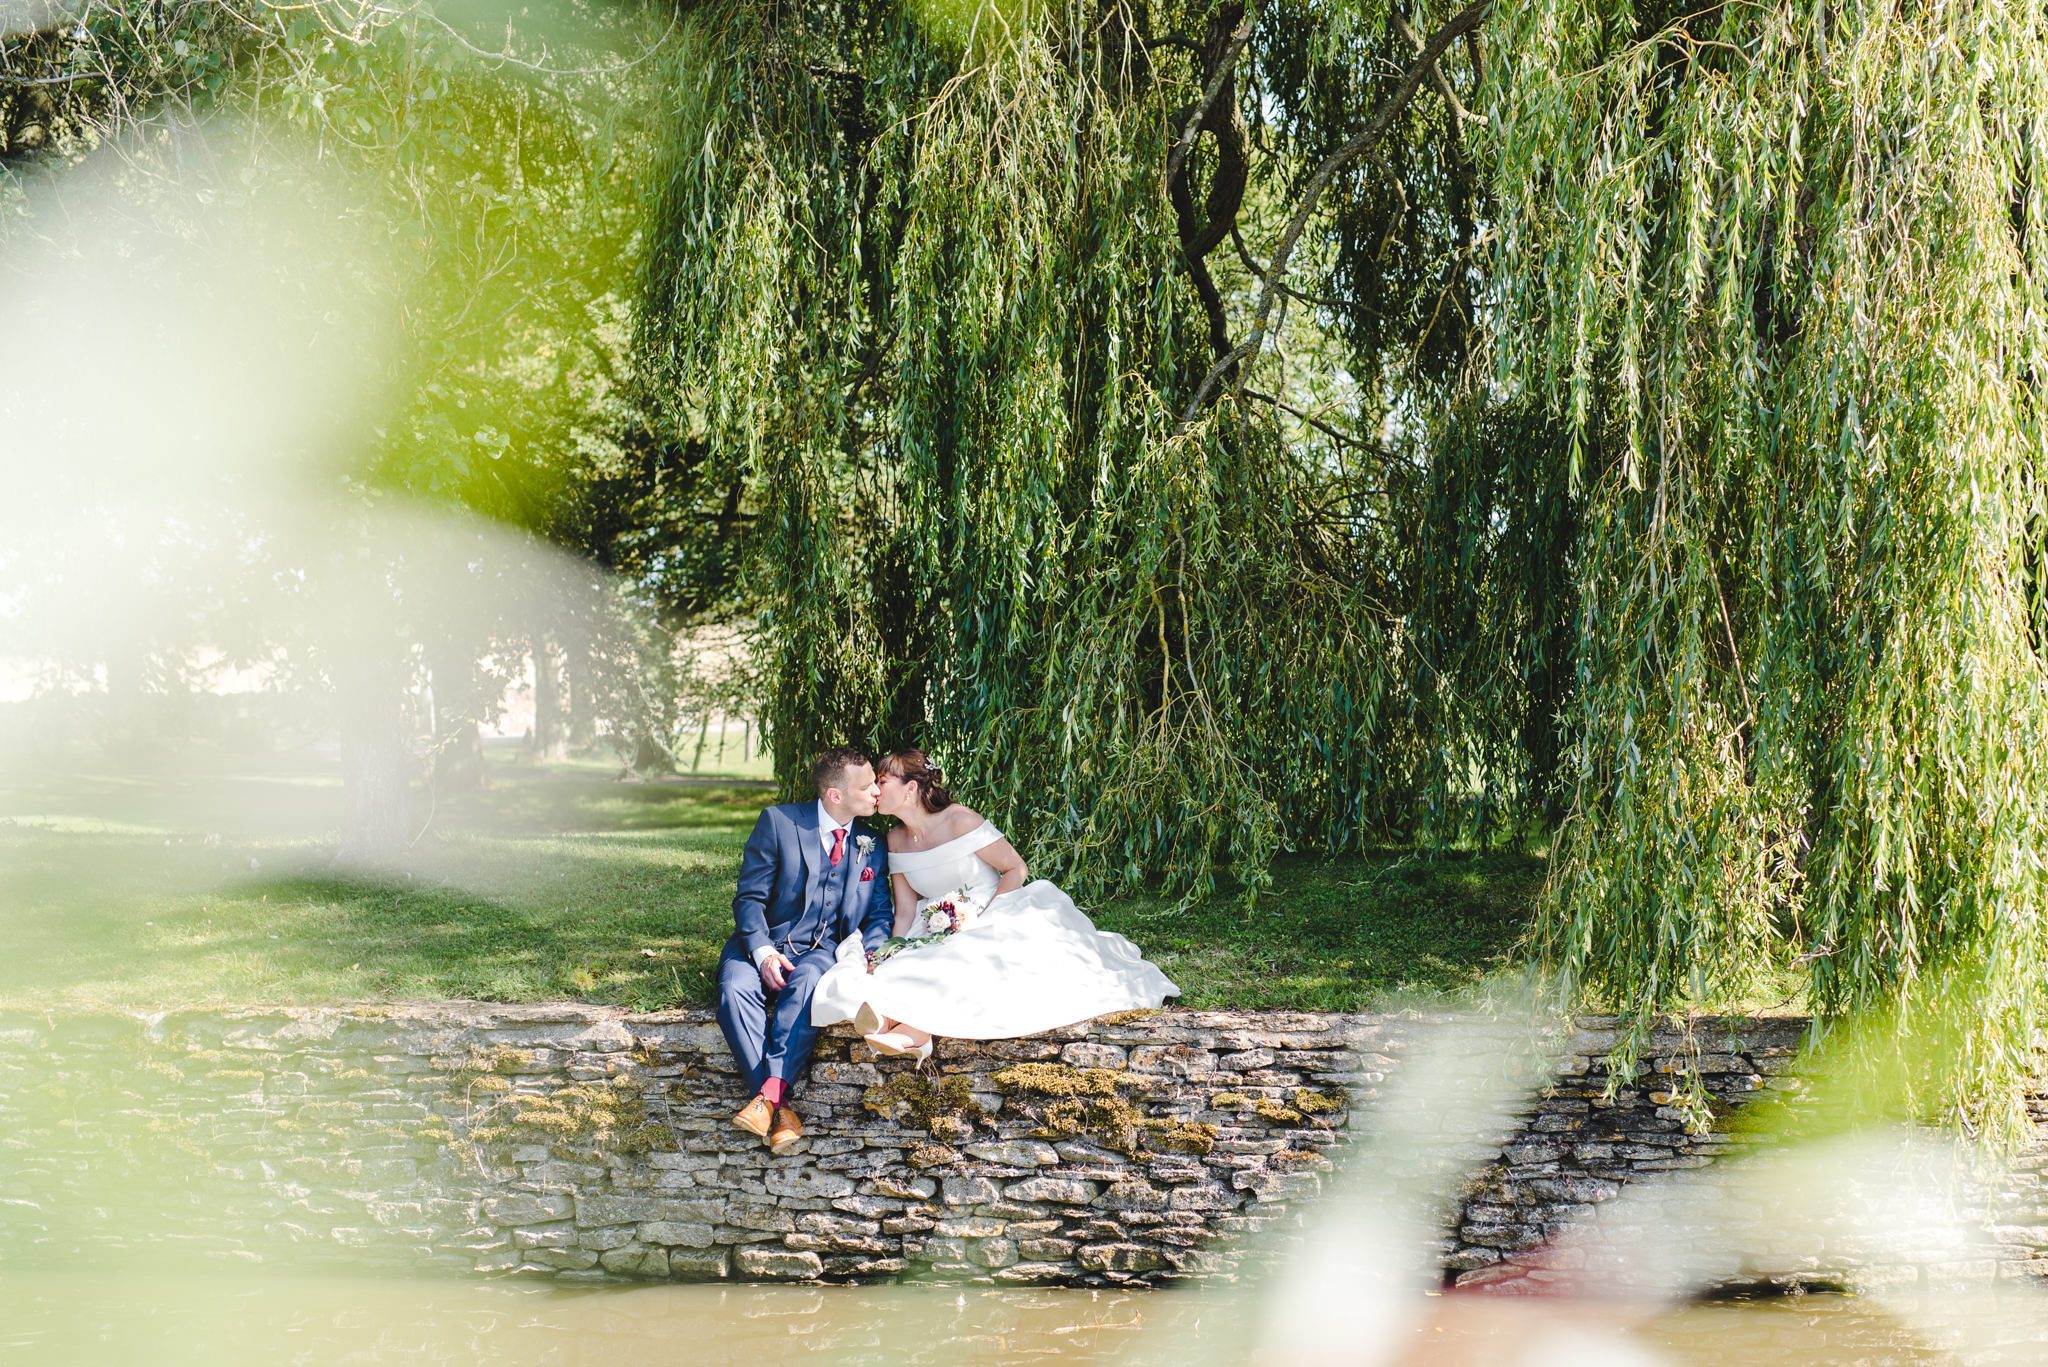 Relaxed wedding photographs at Oxleaze Barn